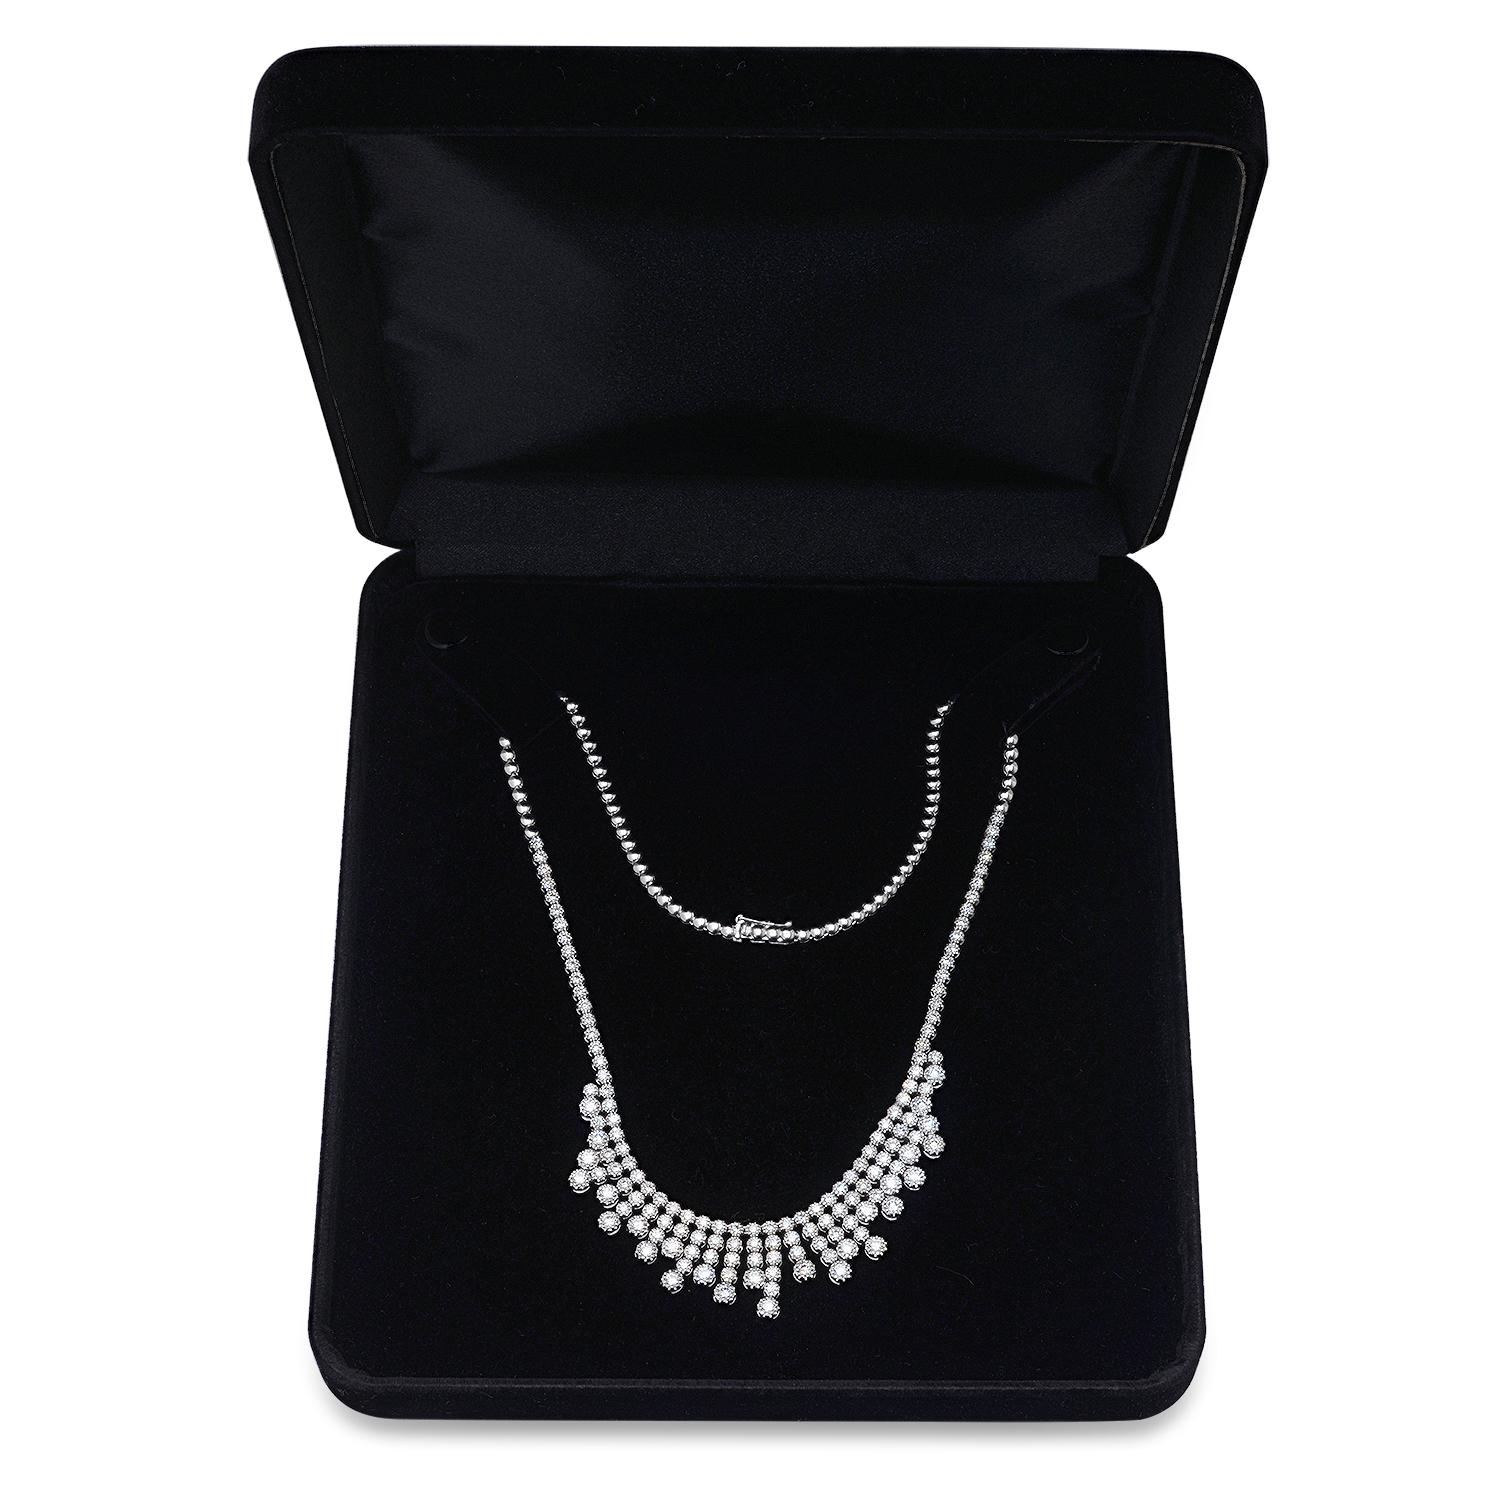 14K White Gold Setting with 7.28ct Diamond Necklace